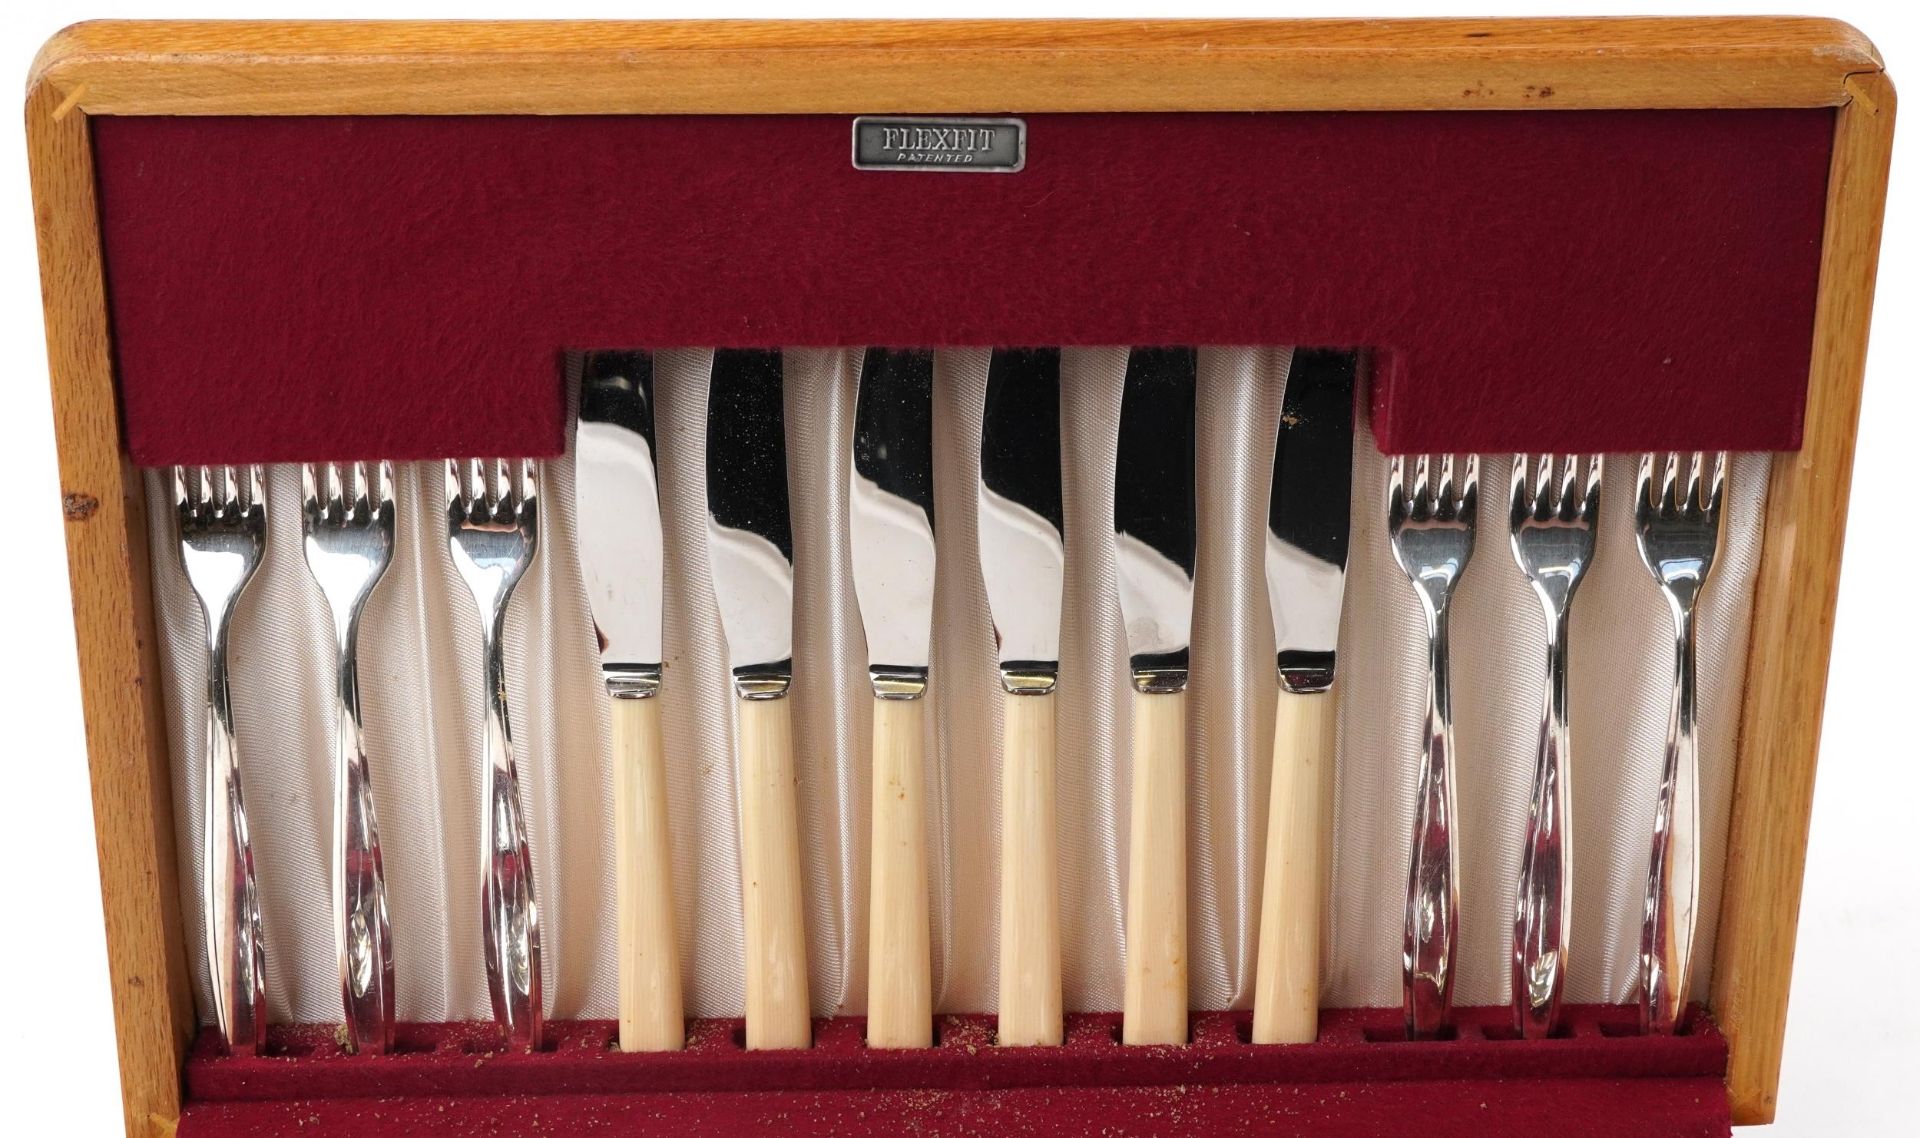 Flexfit six place canteen of stainless steel cutlery, the canteen 38cm wide - Image 2 of 8